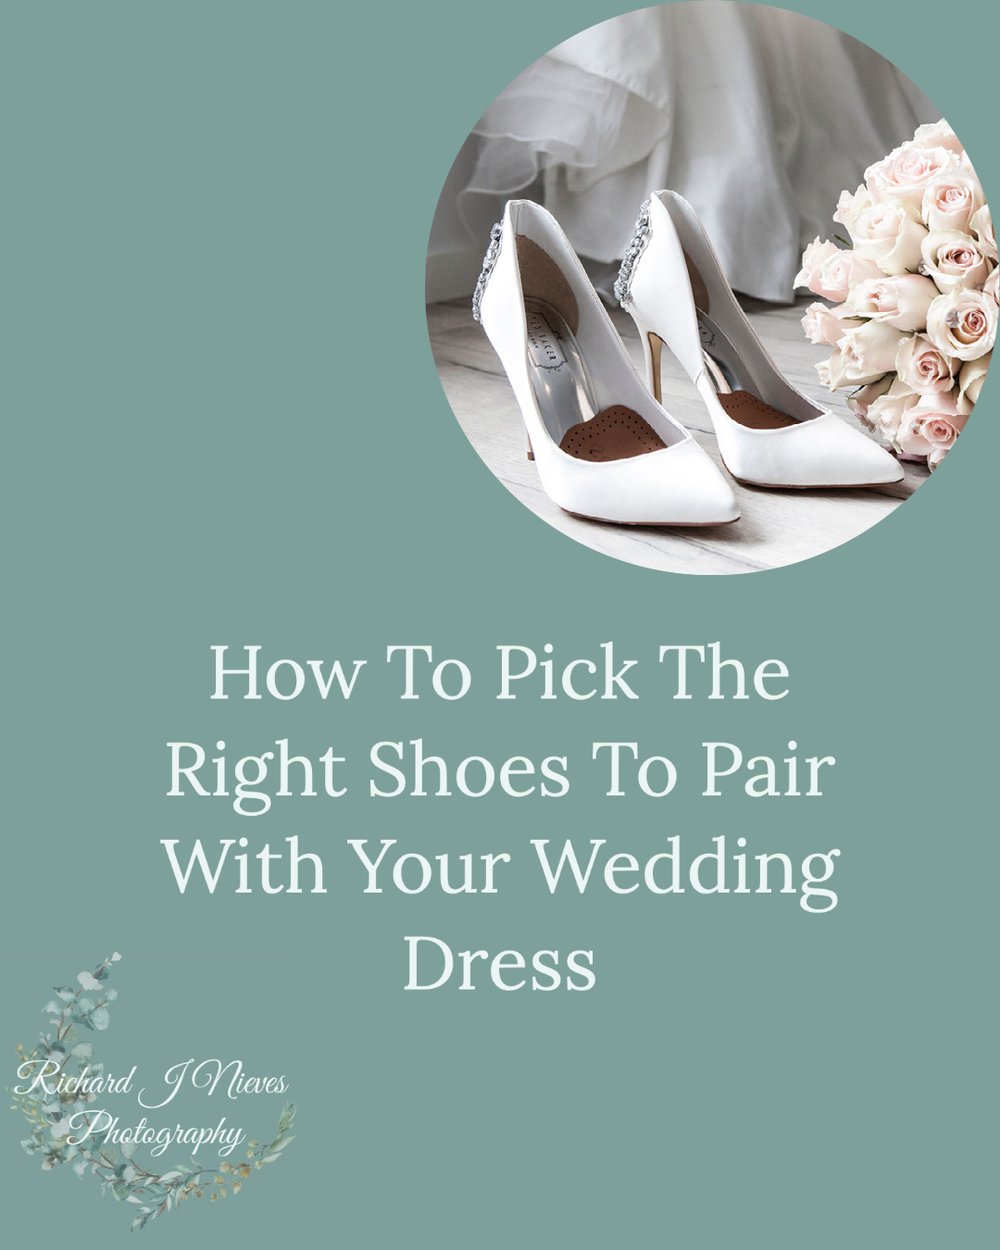 How To Pick The Right Wedding Shoes To Pair With Your Wedding Dress ...